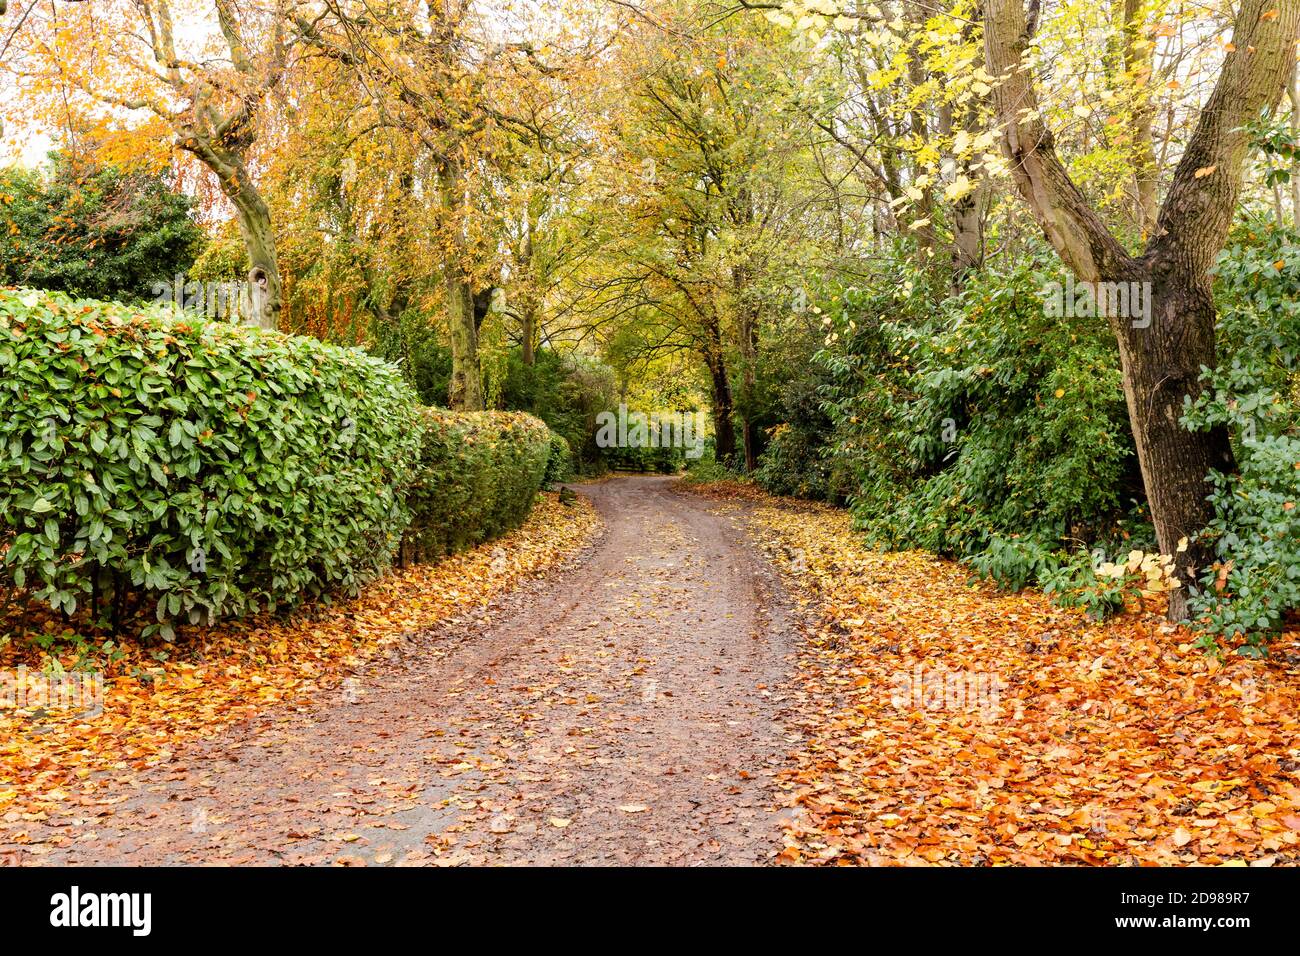 Autumn in Yorkshire. Leaf fall at the side of Fairfield Drive, a leafy lane in Baildon, Yorkshire, England. Stock Photo